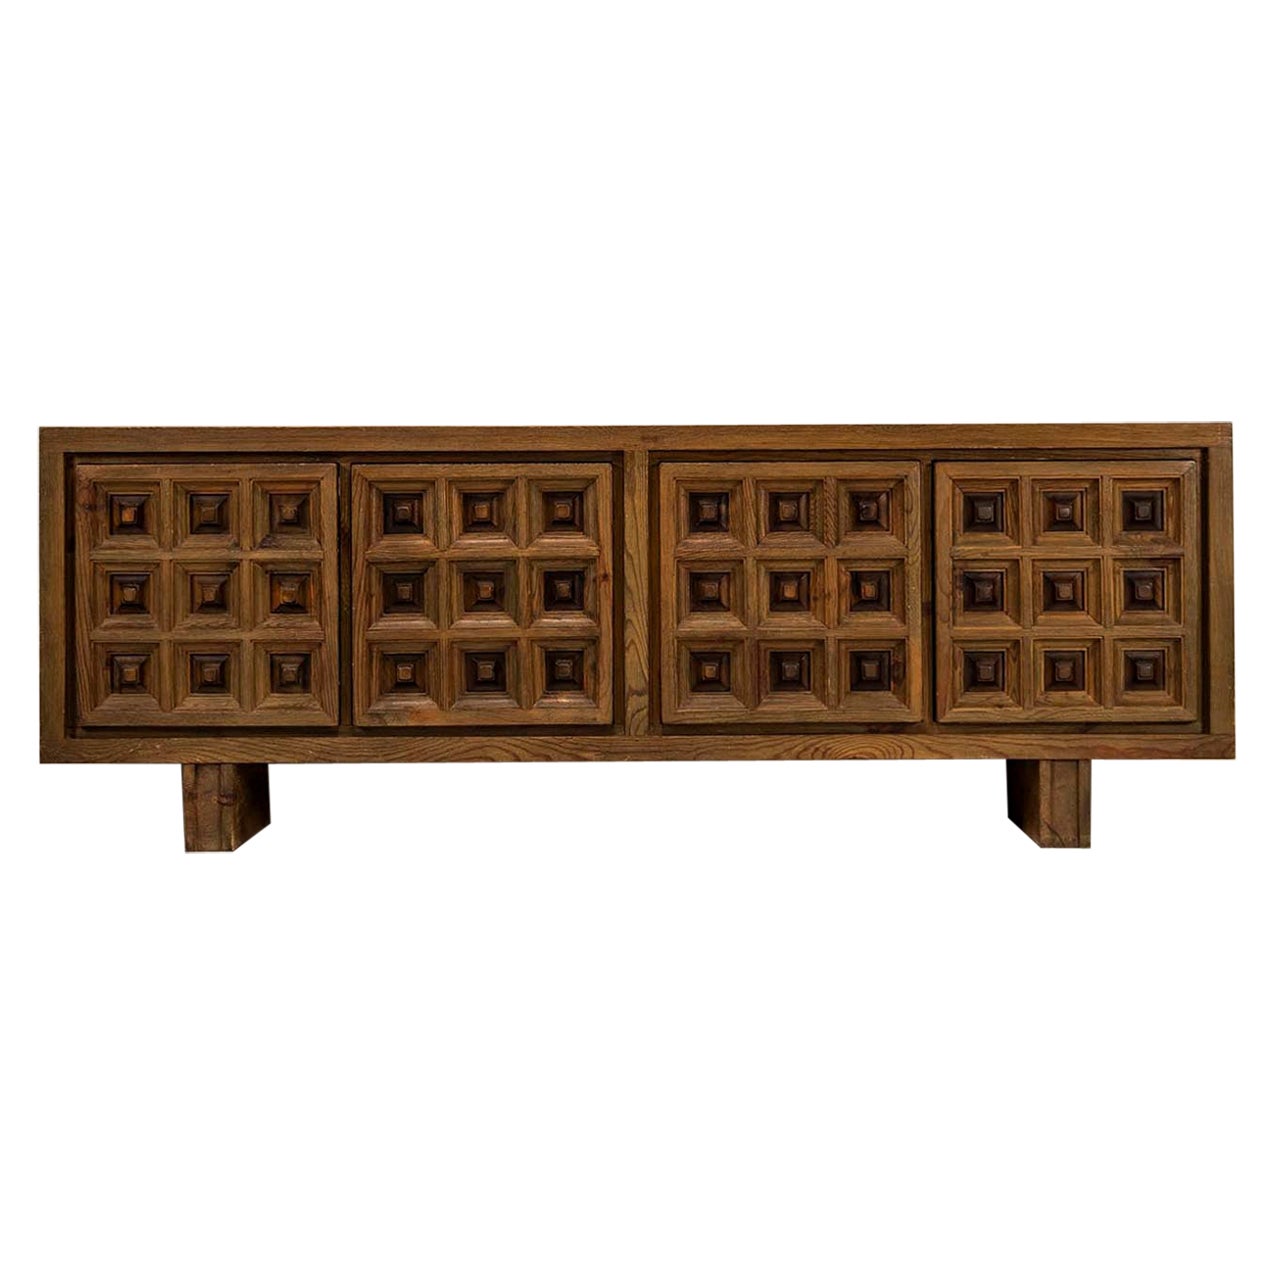 Biosca Sideboard in Stained Pine, Spain 1960s